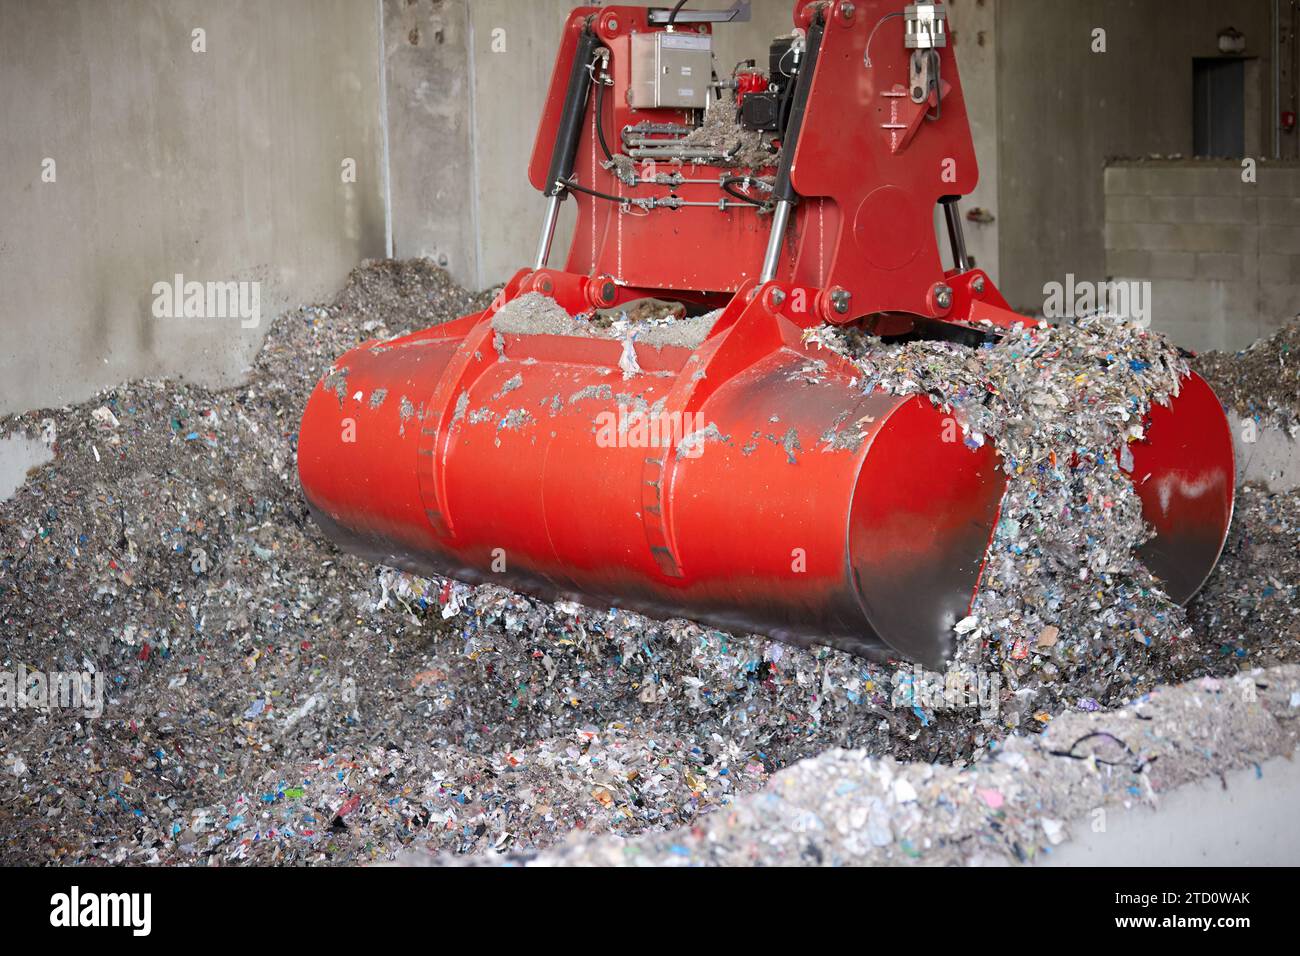 A red bridge crane grab during Waste derived fuel handling. Processing of municipal solid waste into an energy source. Stock Photo